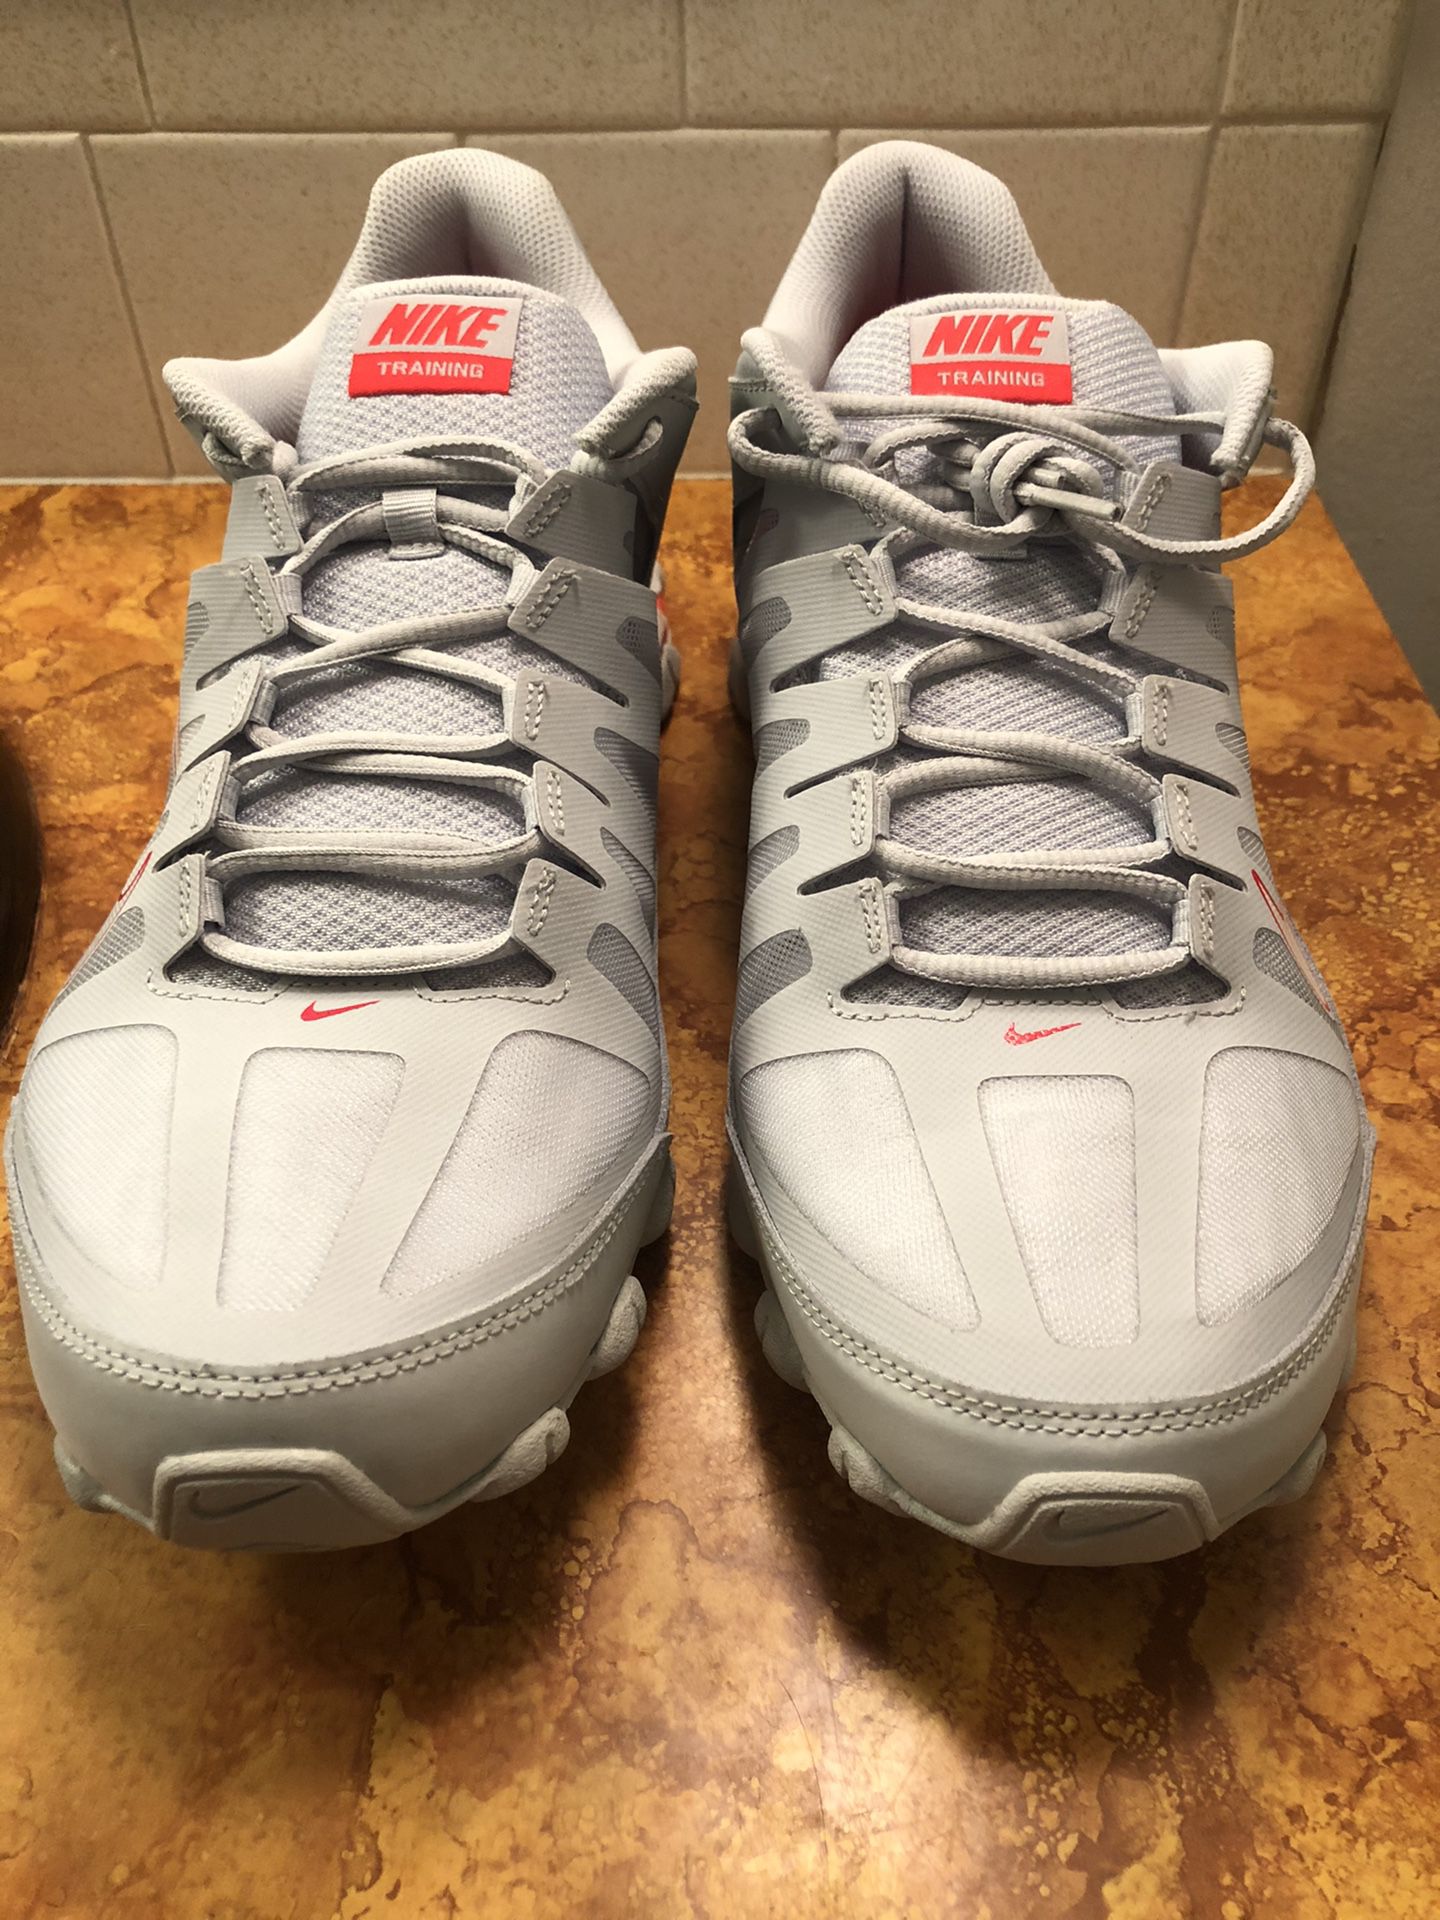 Nike Reax 8TR Mesh Sport Shoes in Plus Size Grey Size 14